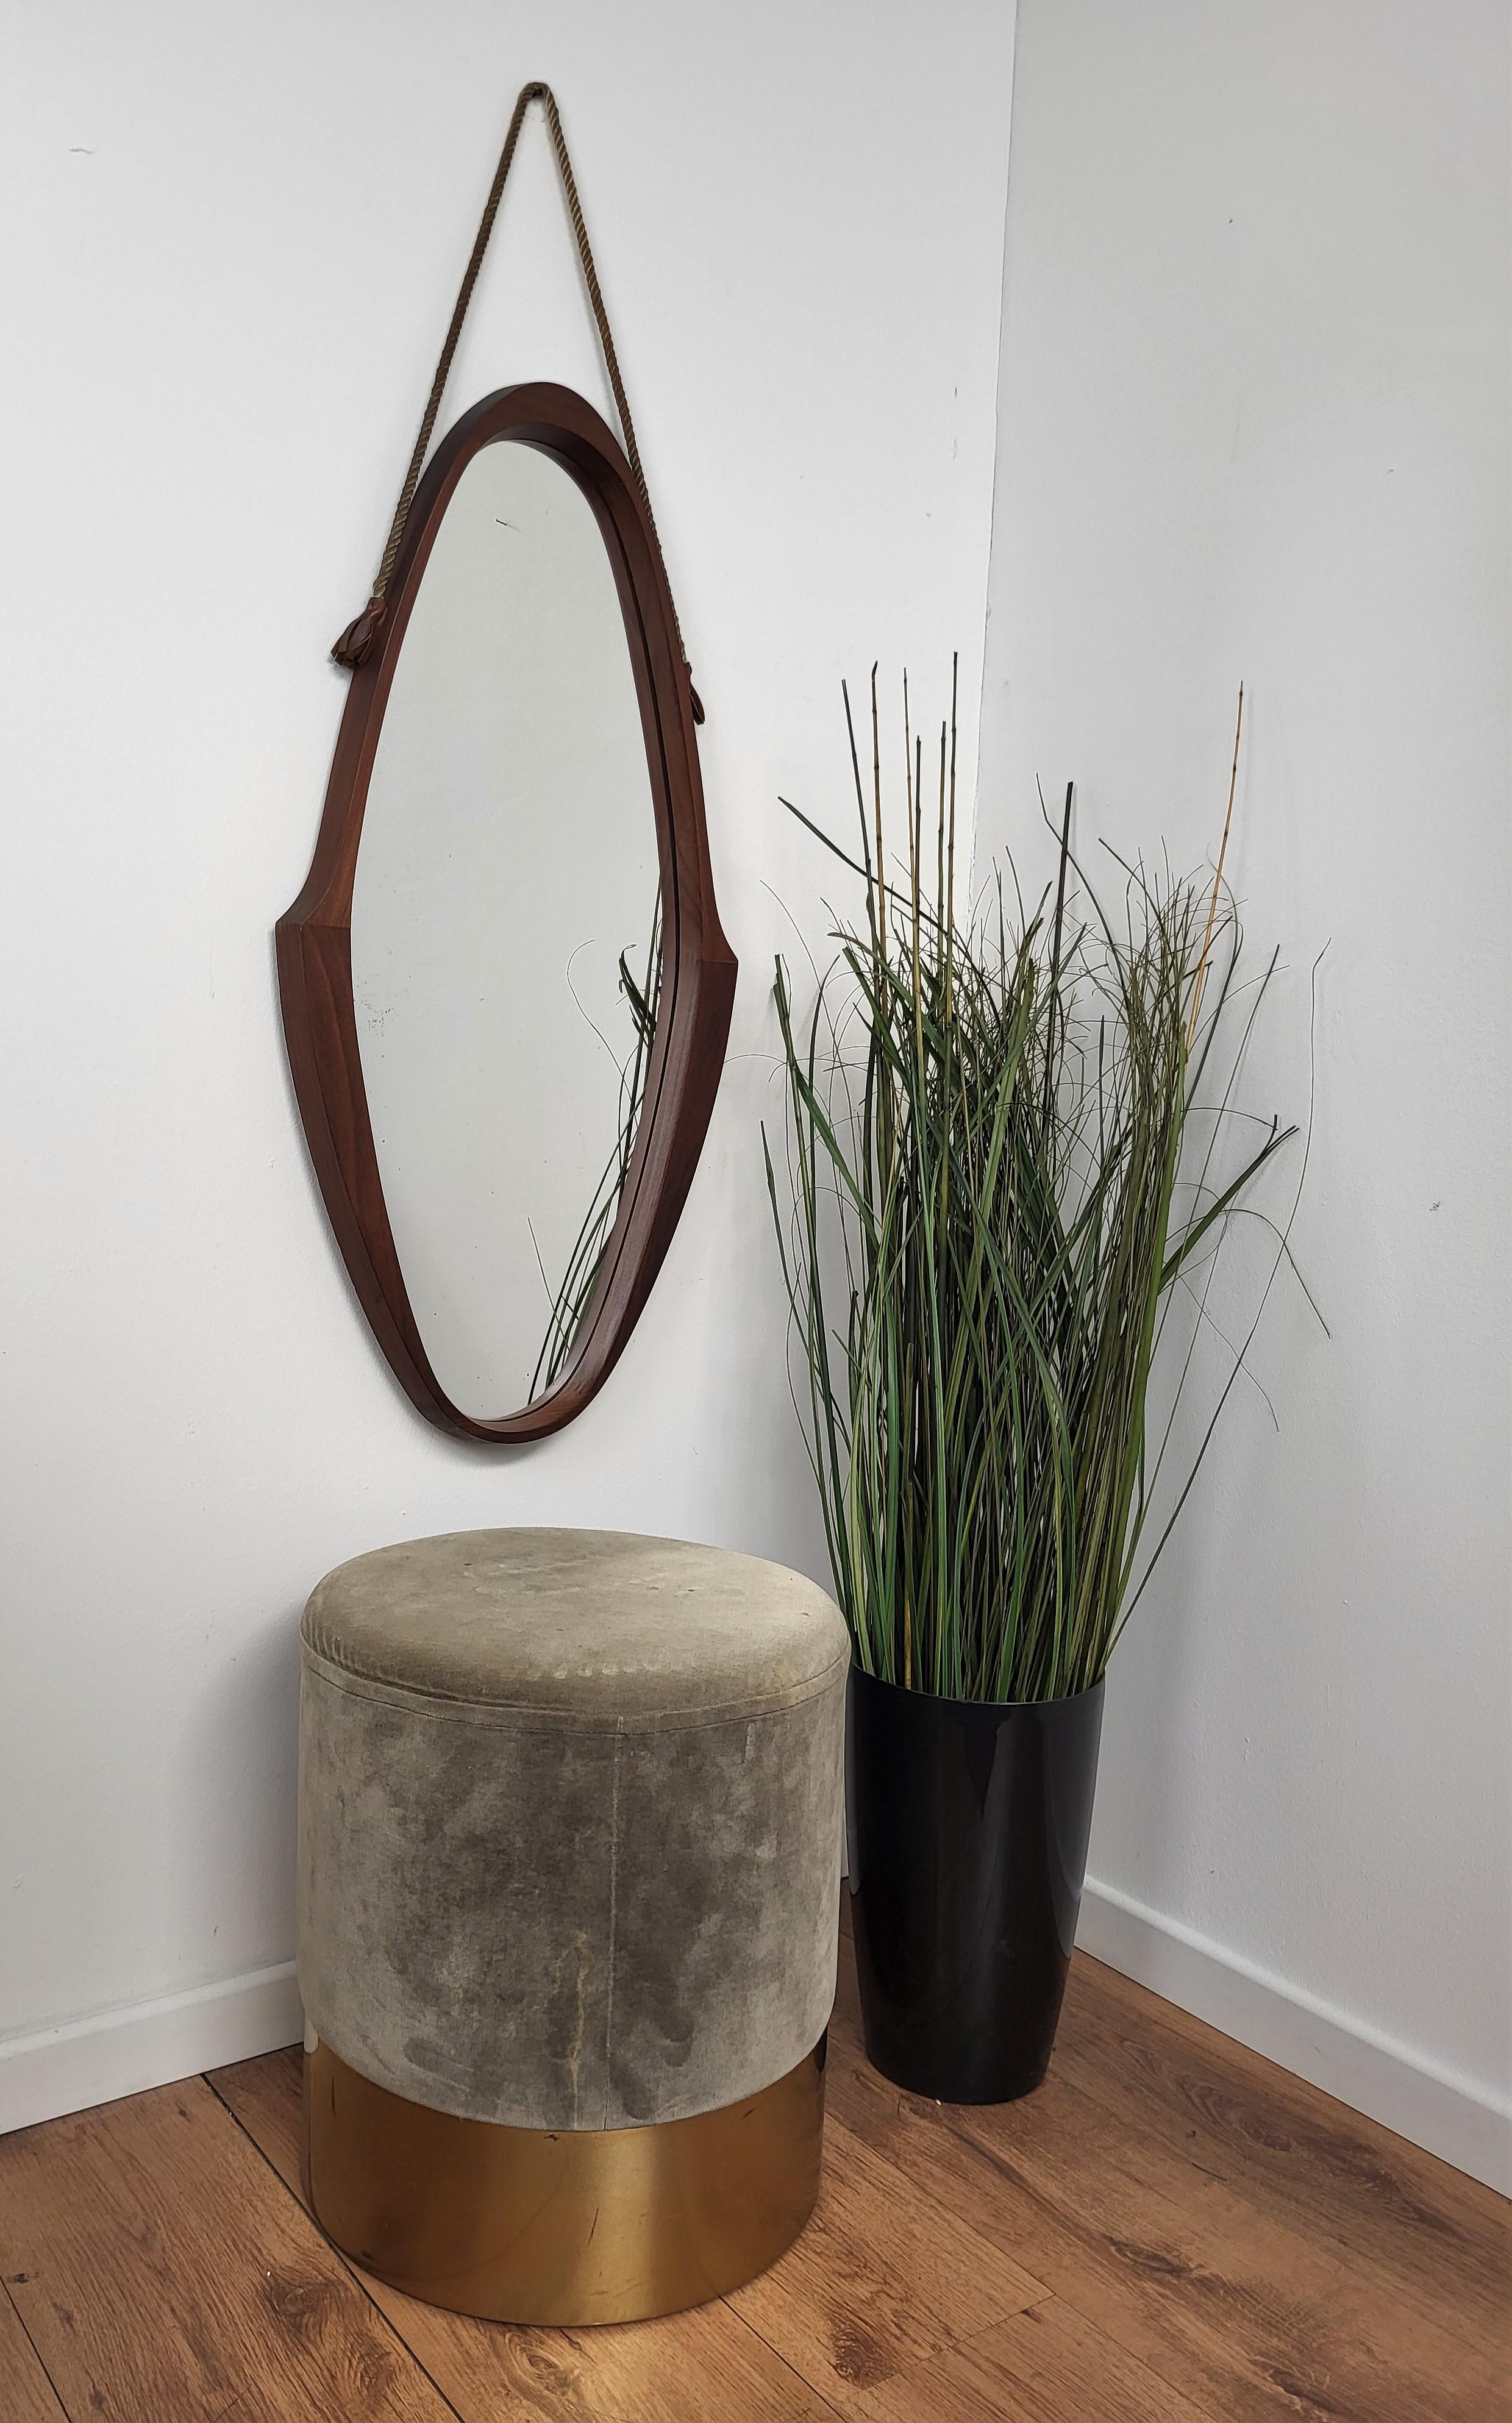 A Mid-Century Modern wooden oval wall mirror with rope and leather hanger, designed and produced in Italy, c. 1950s.